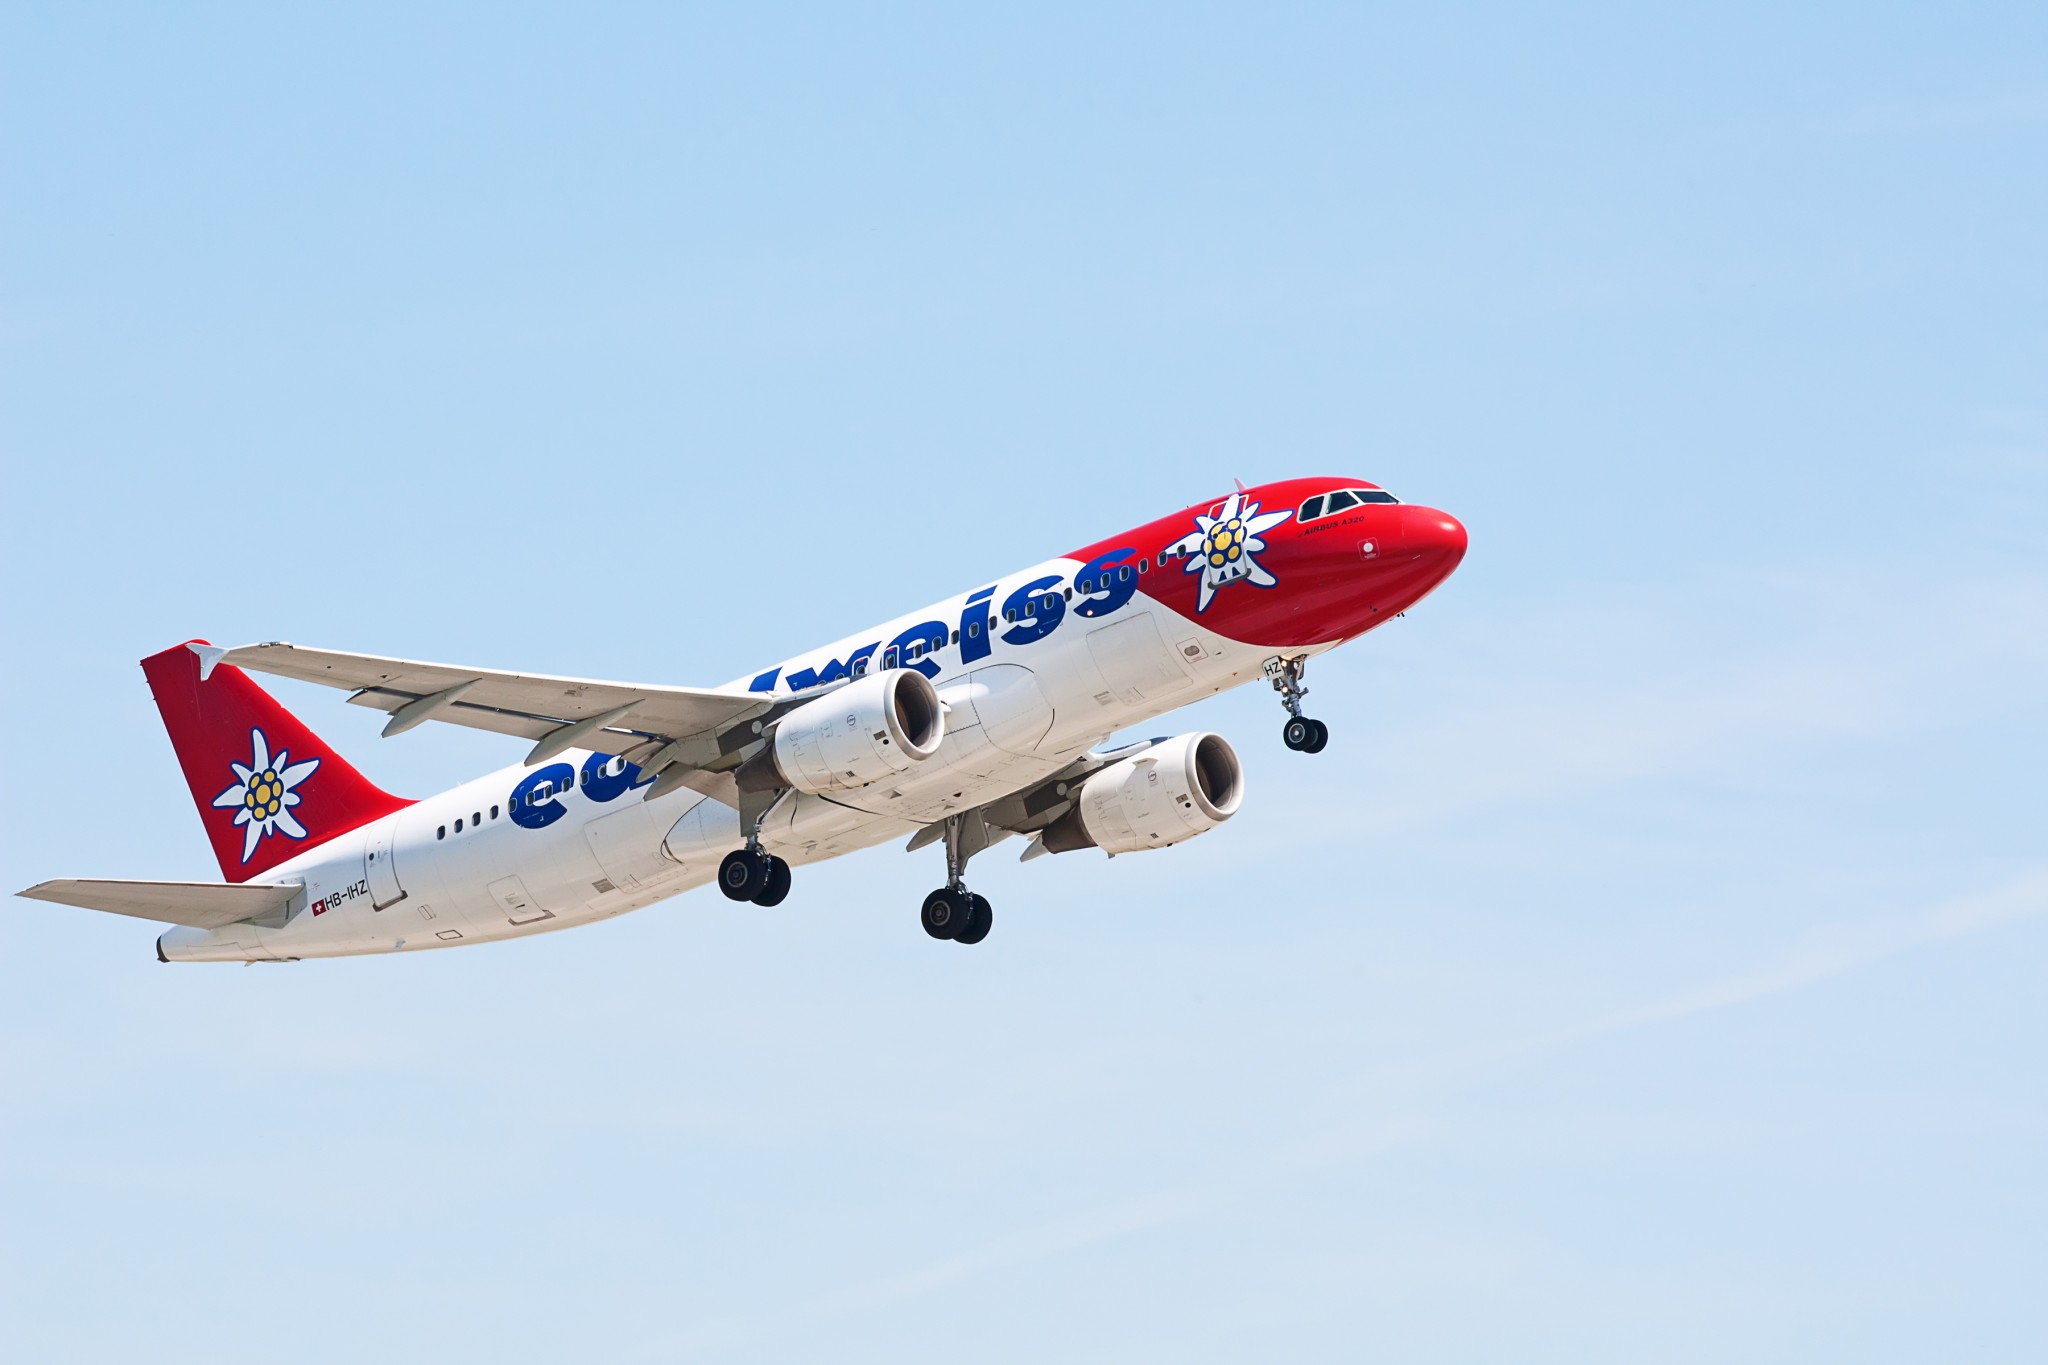 Edelweiss Air takes delivery of three A340-300s